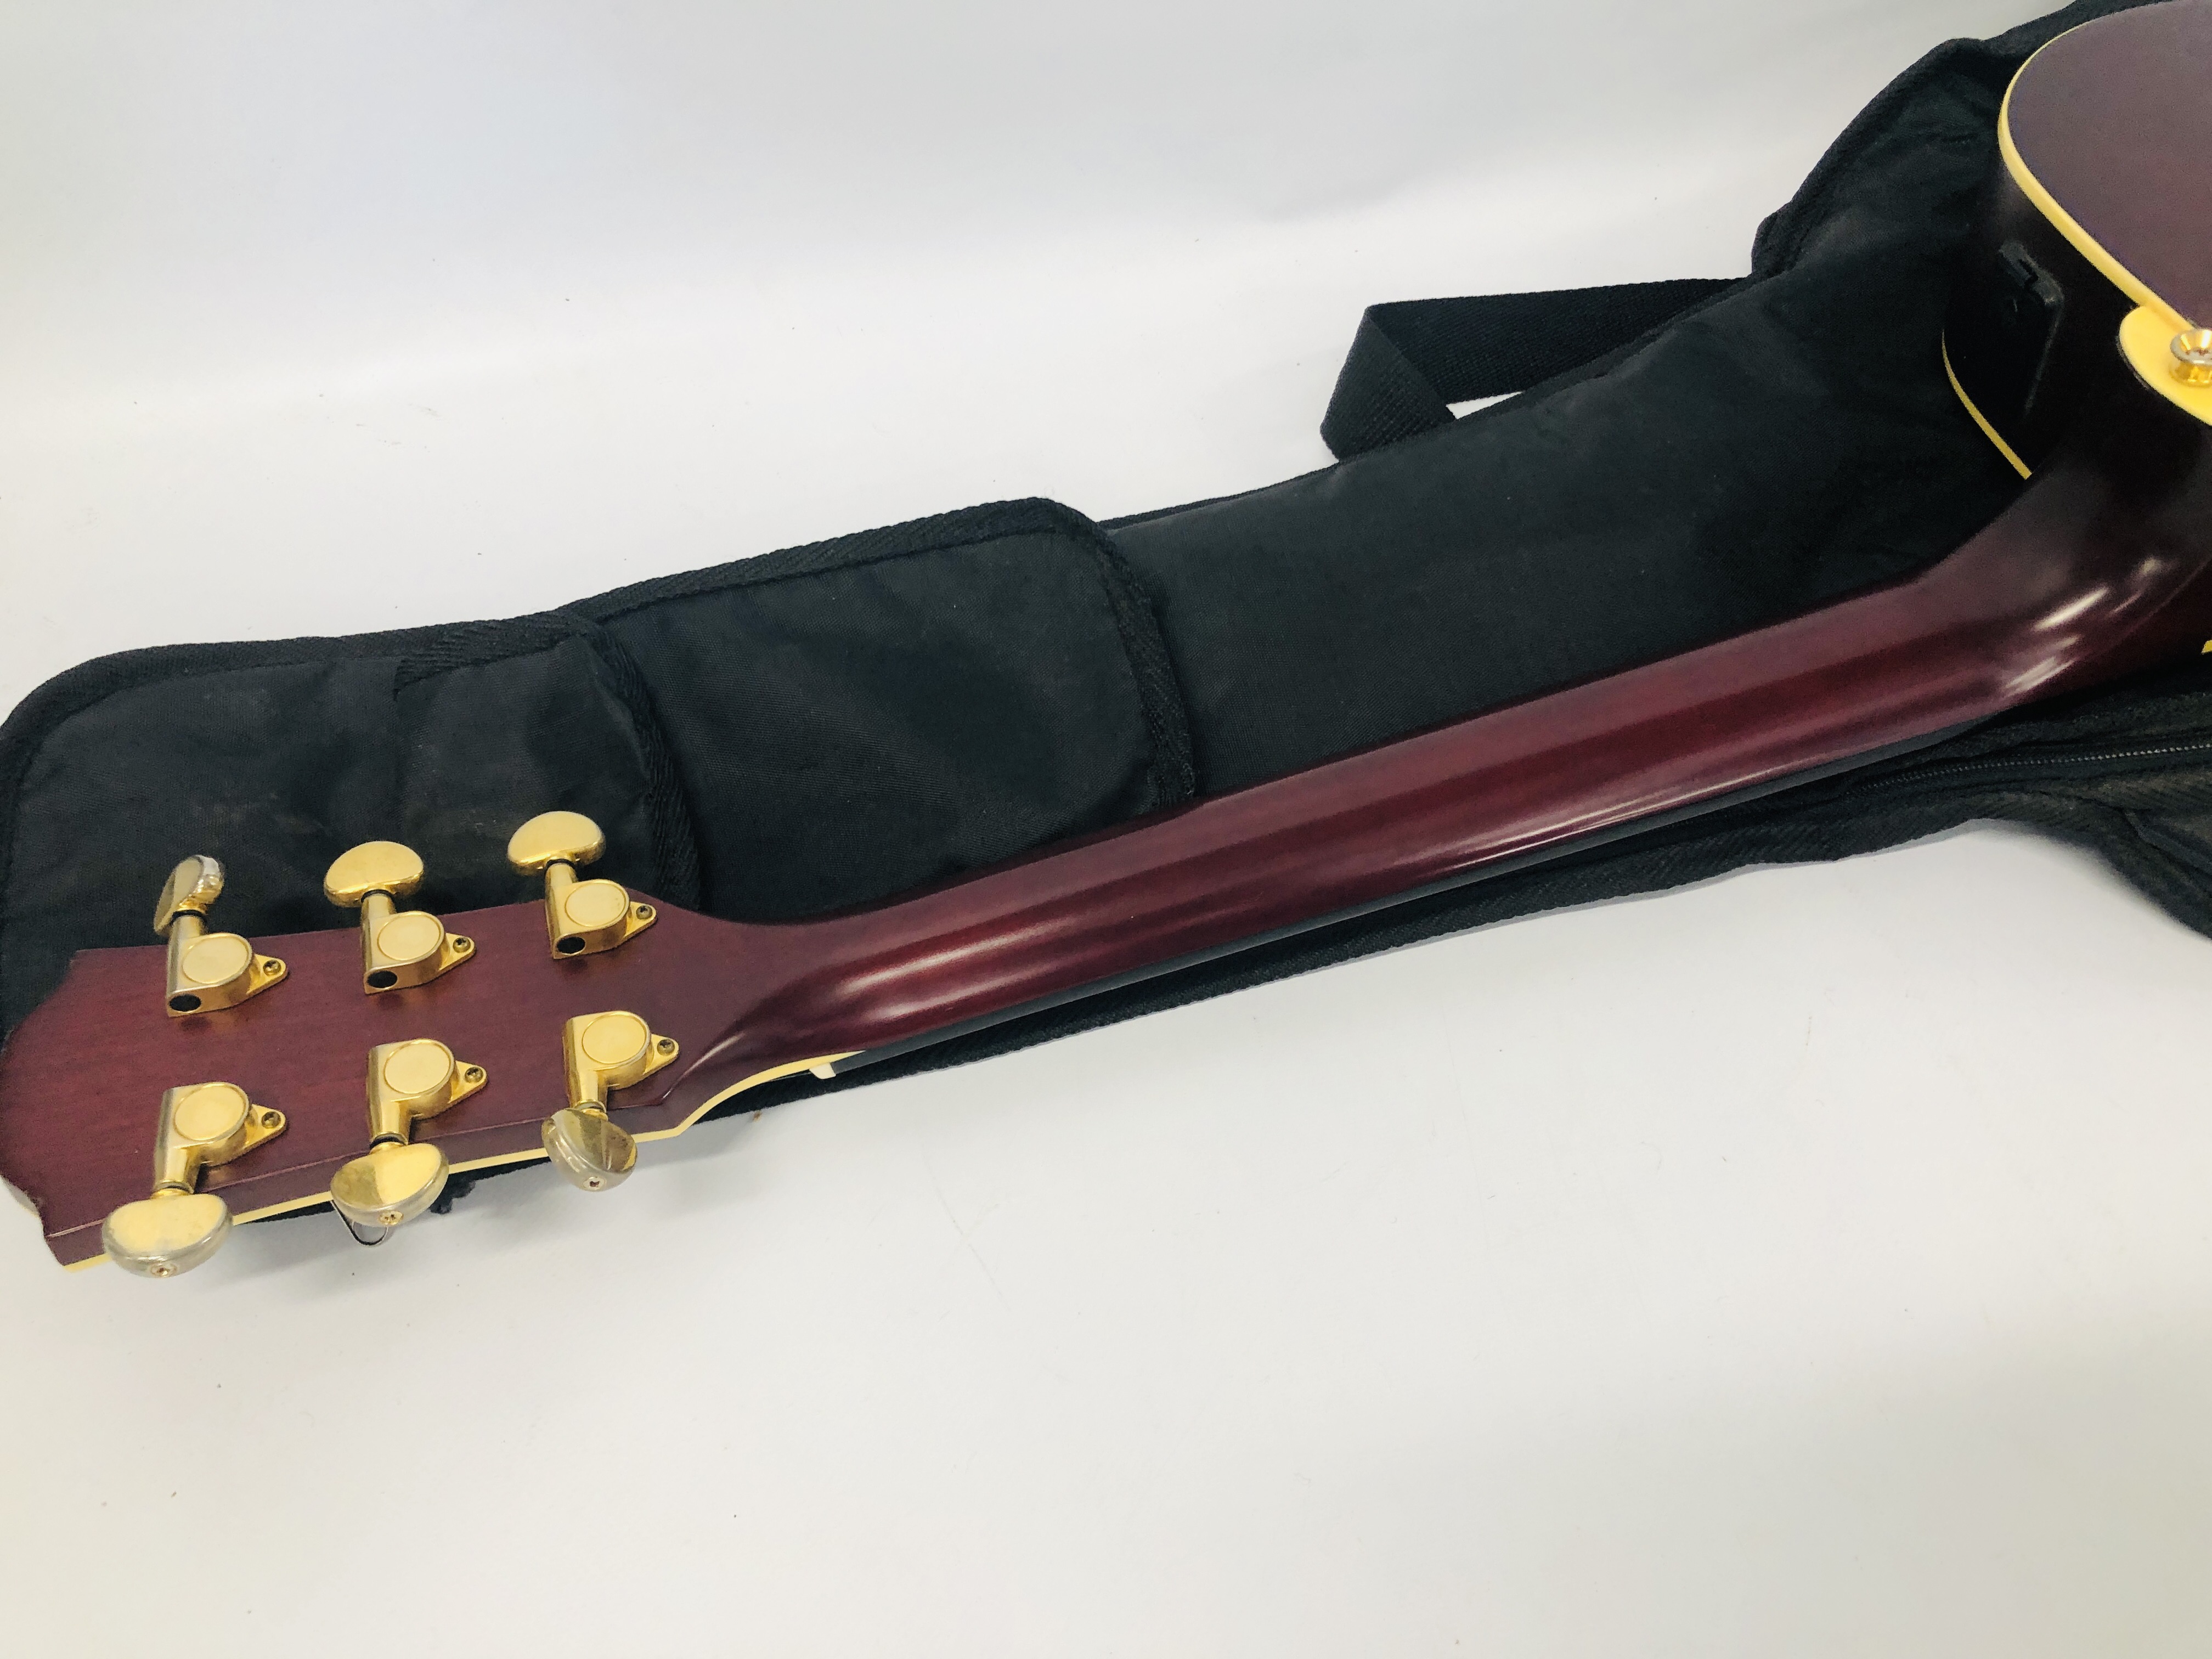 A YAMAHA ELECTRO ACOUSTIC GUITAR WITH SOFT ROCKBAG BACK PACK CARRY CASE - SOLD AS SEEN. - Bild 7 aus 8